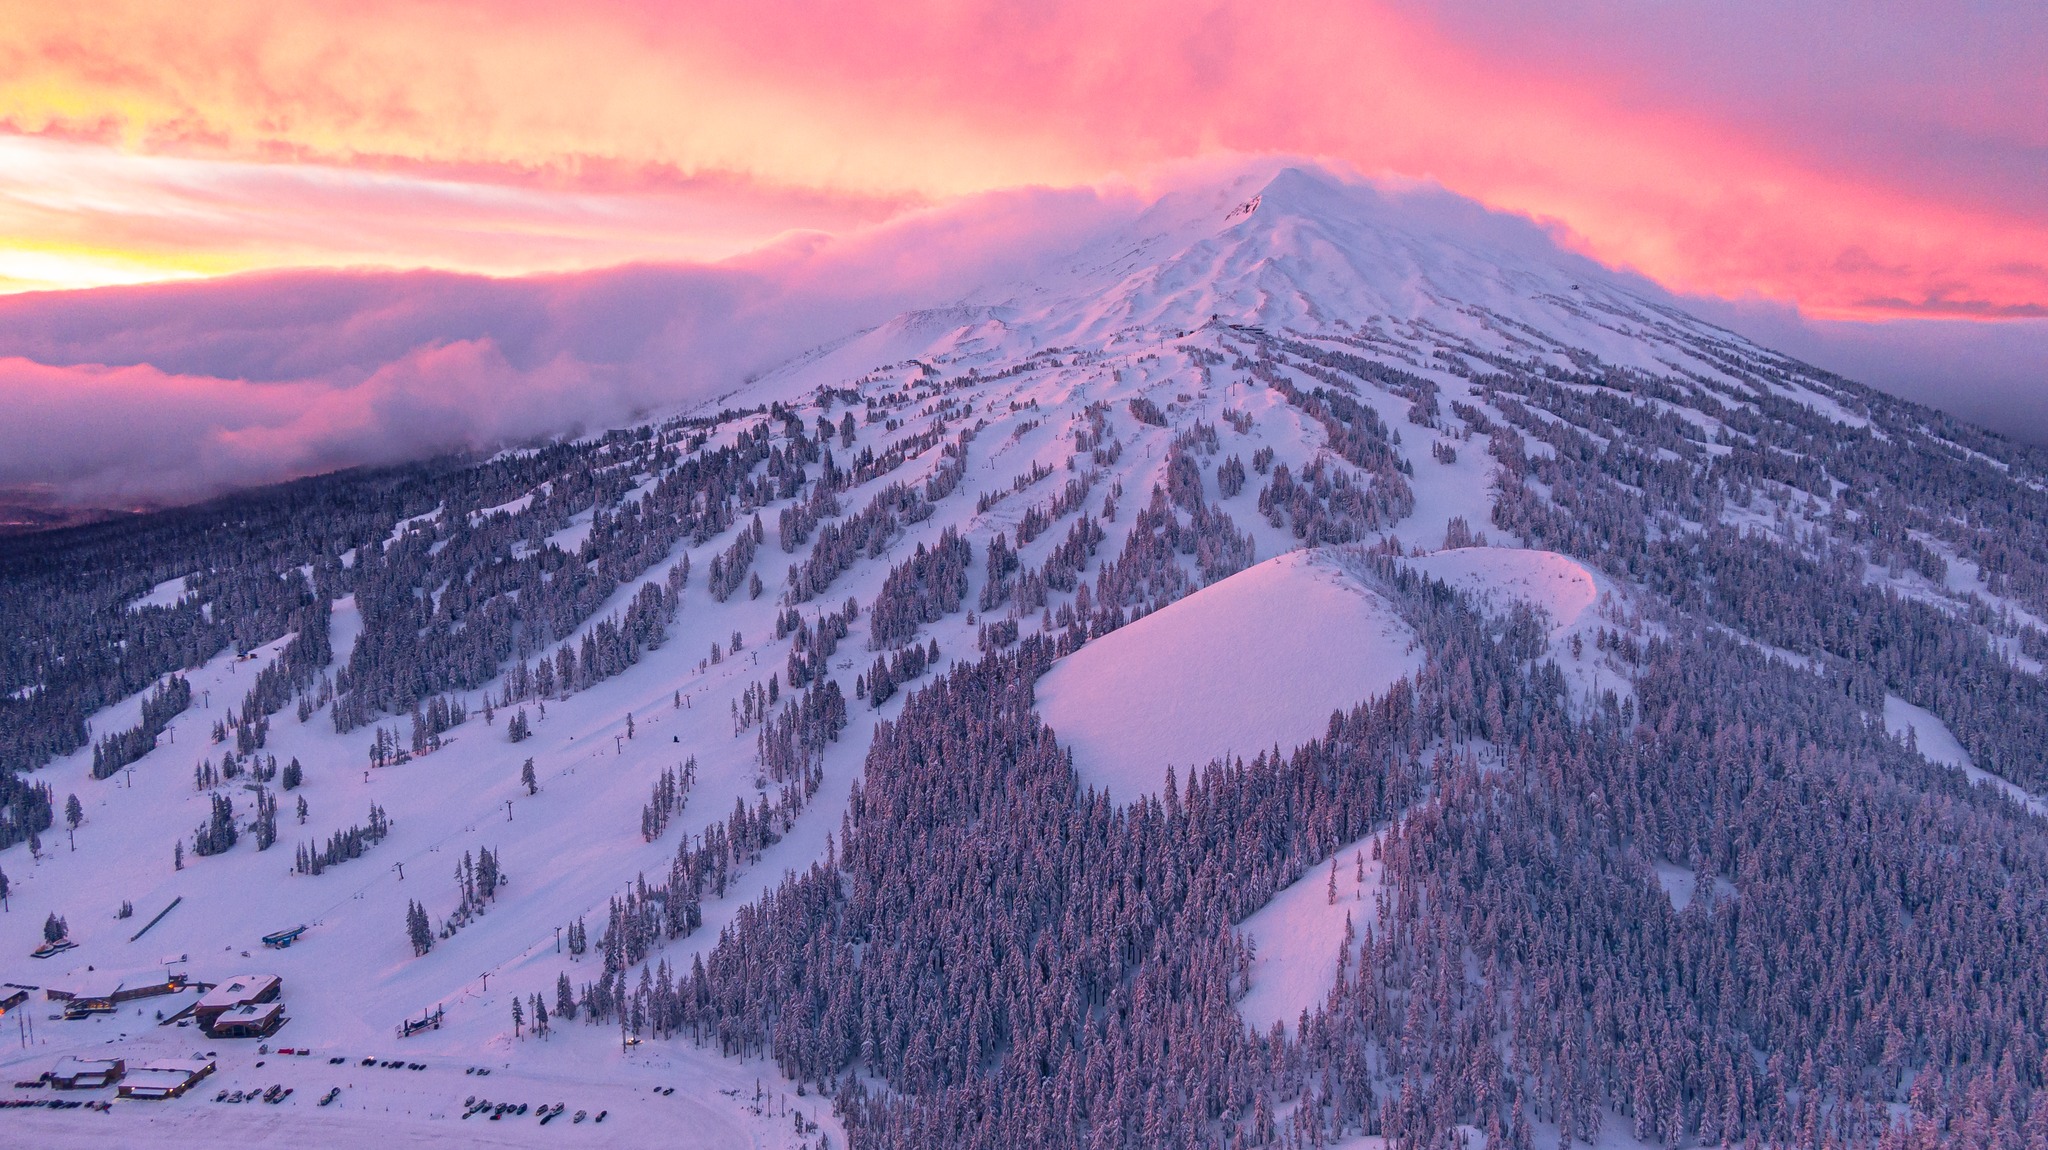 A pink sunset over Mount Bachelor.